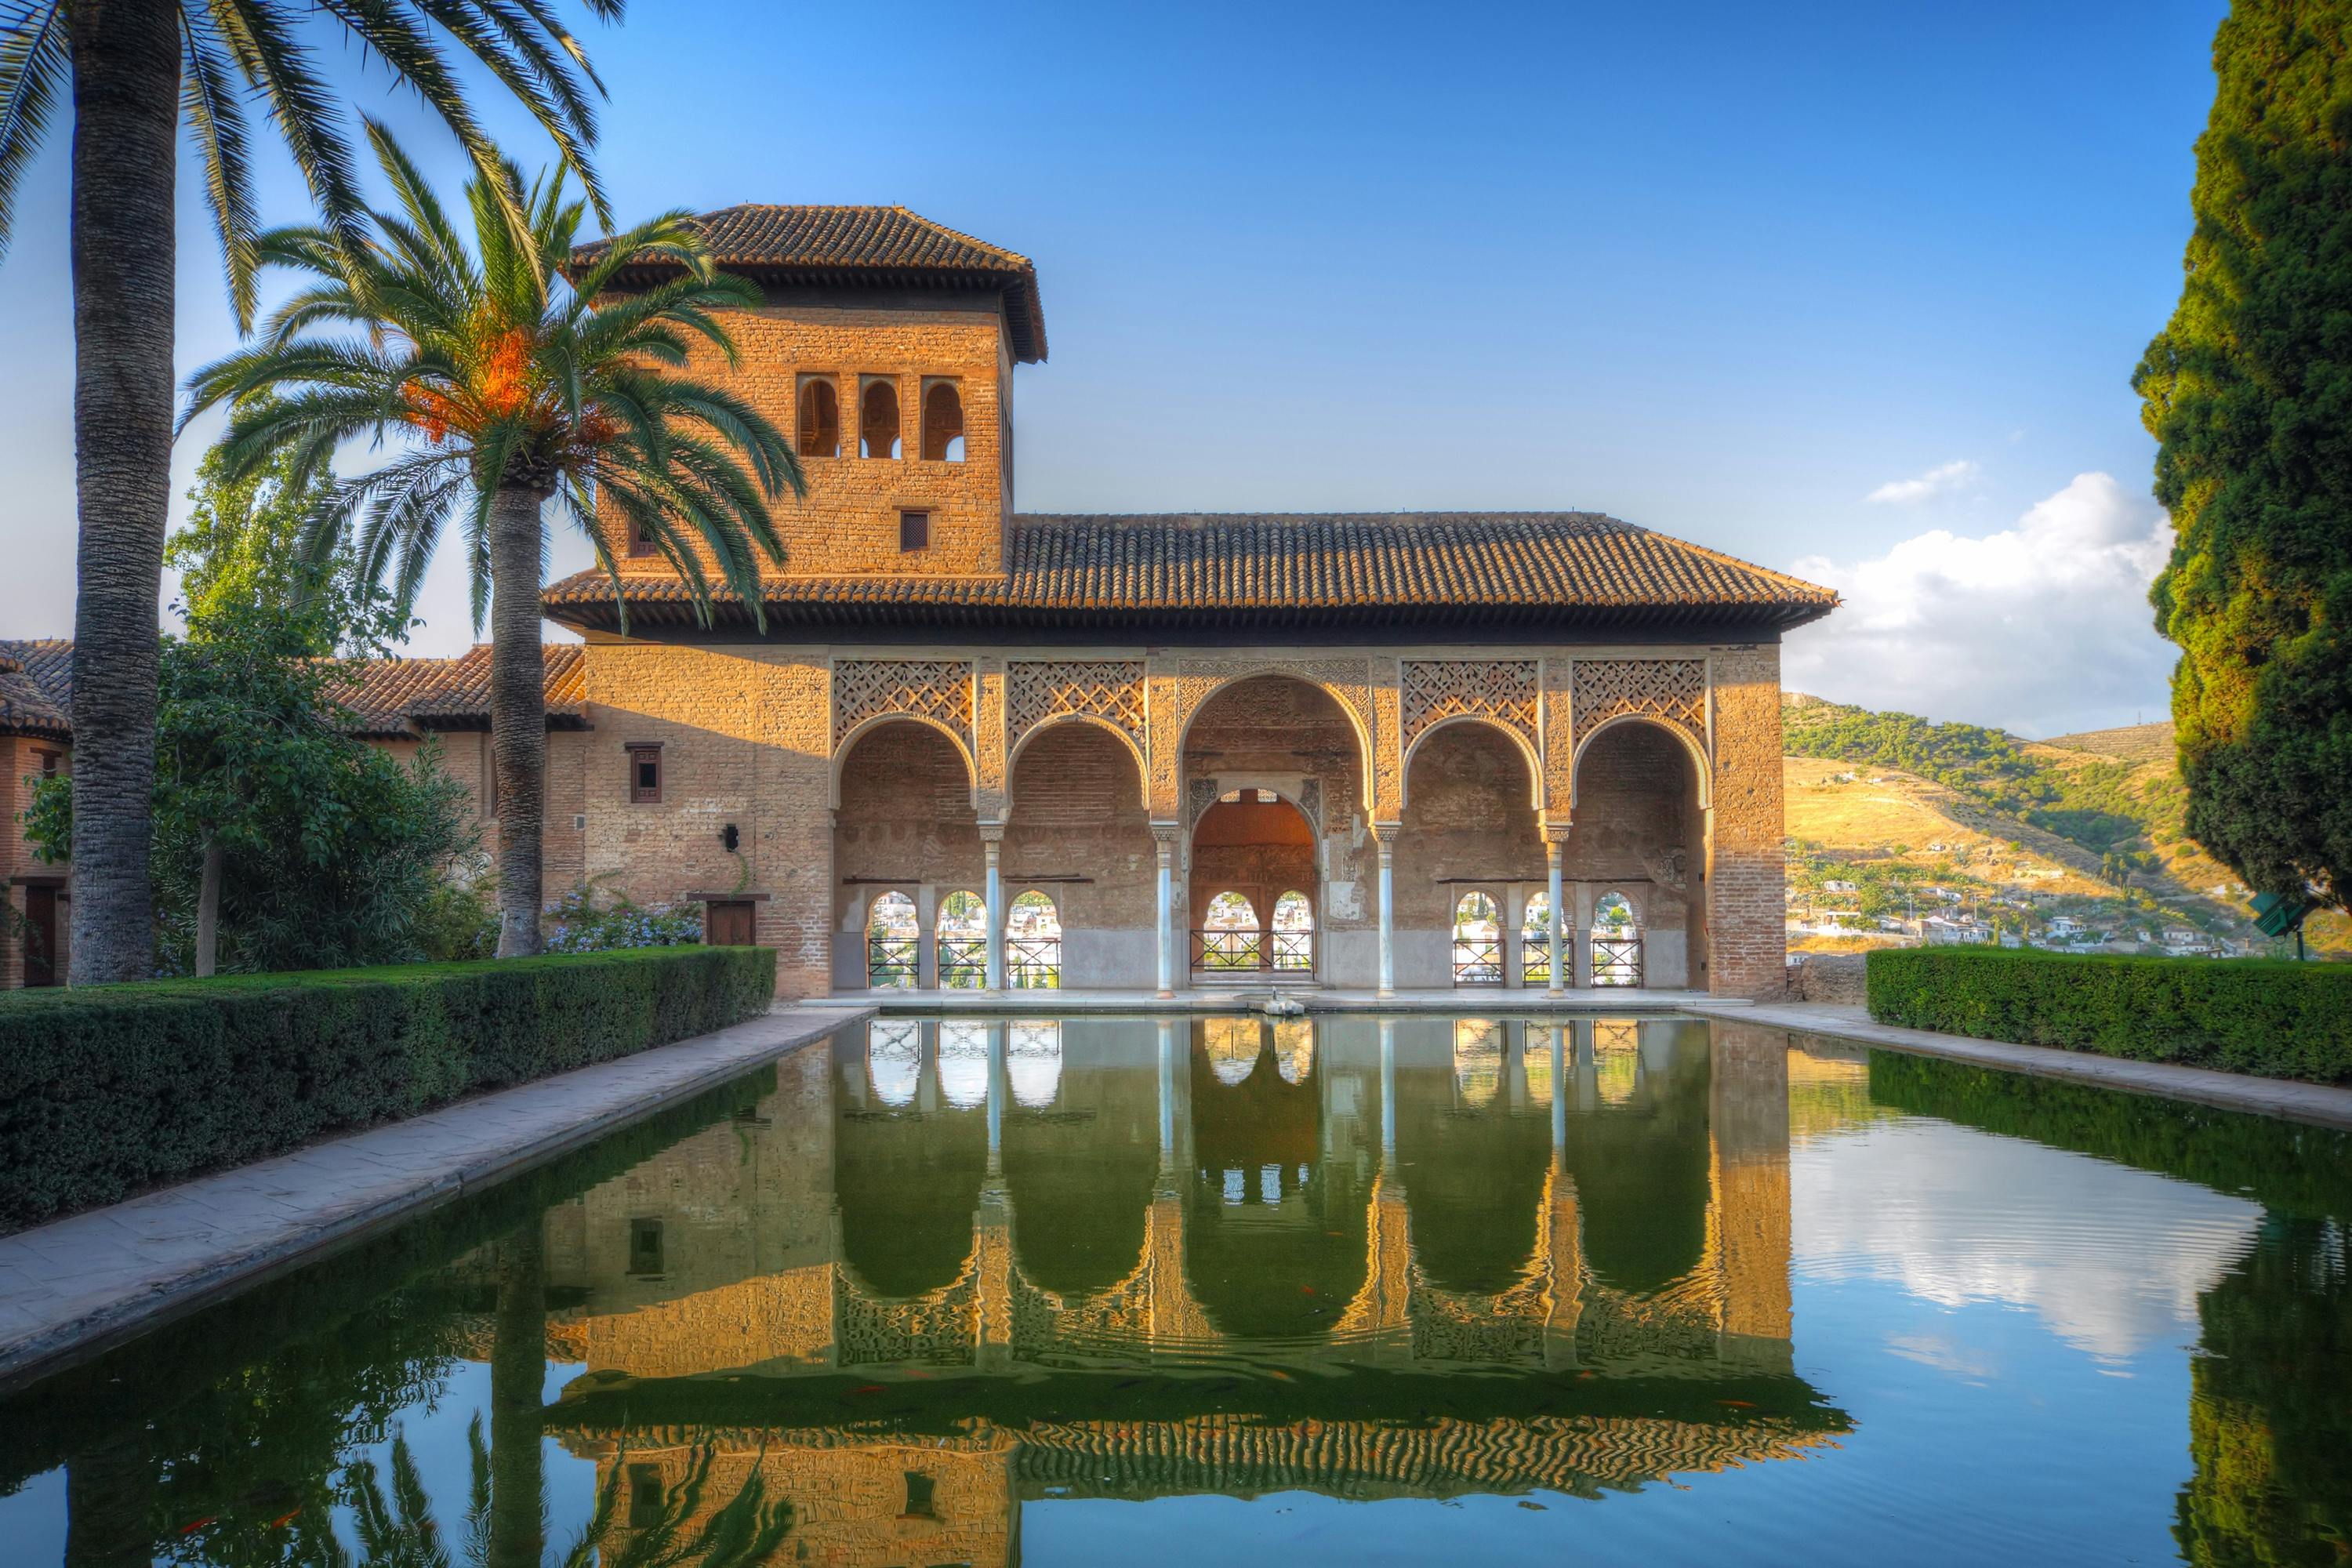 Alhambra guided visit with Arab Baths Musement